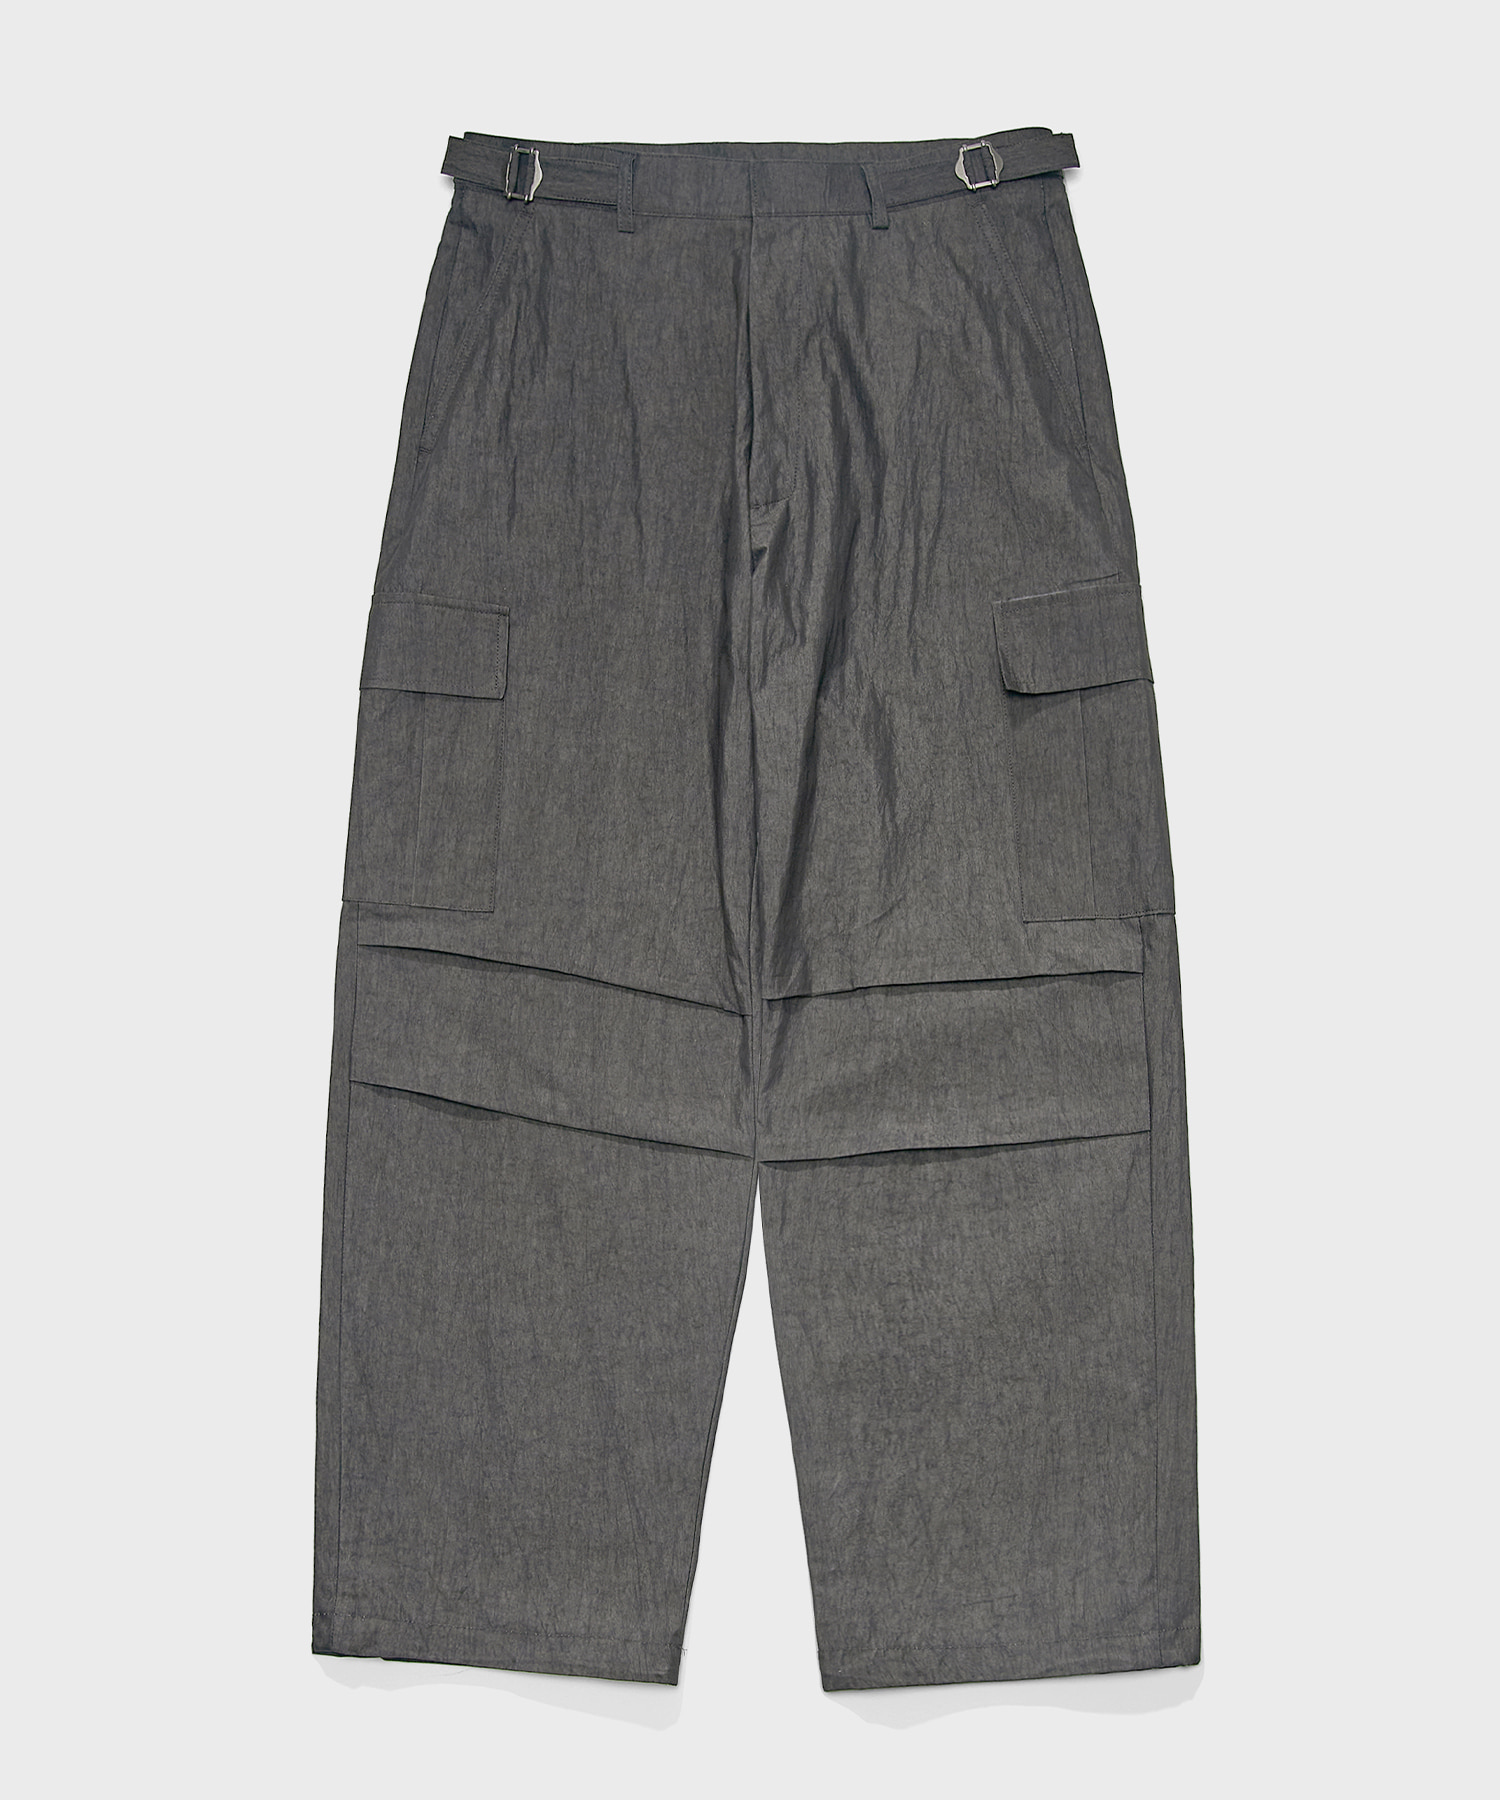 TY office casual sports parachute pants_Gray